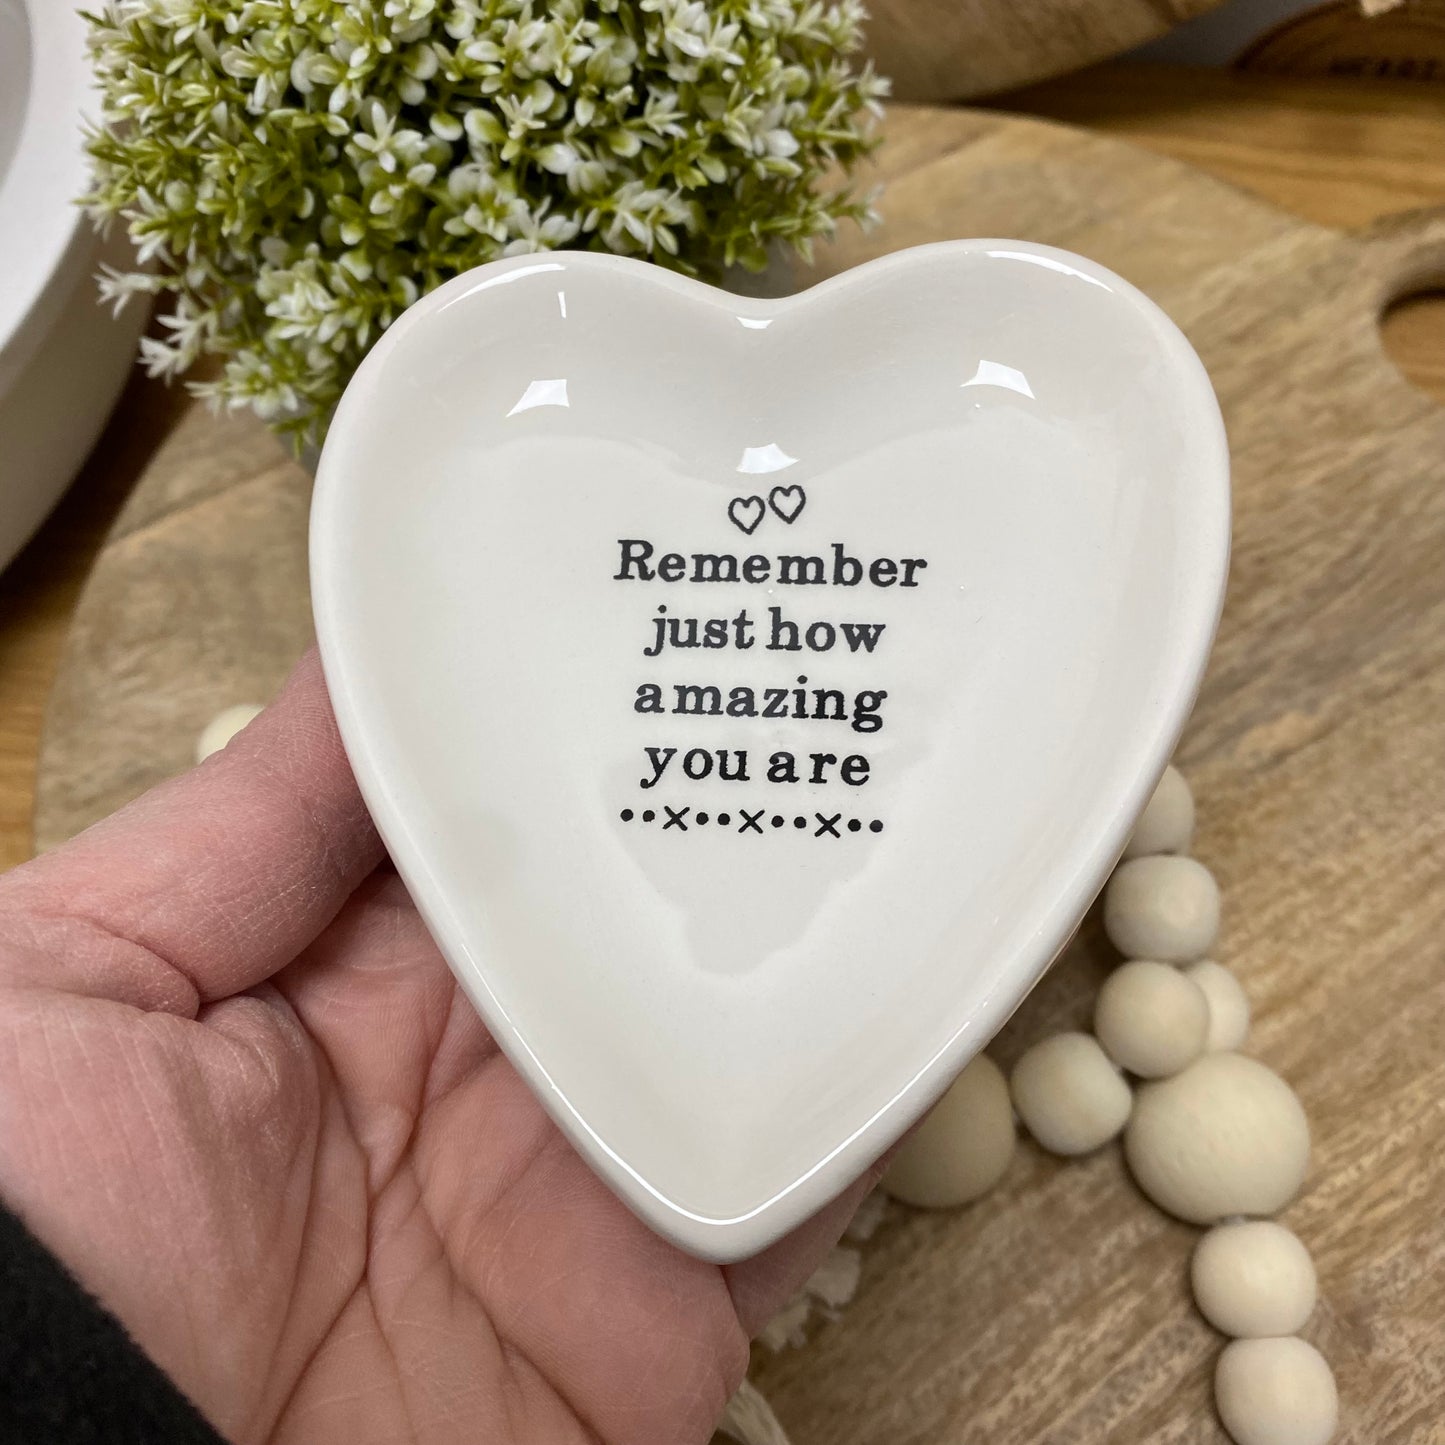 Remember you are amazing trinket dish